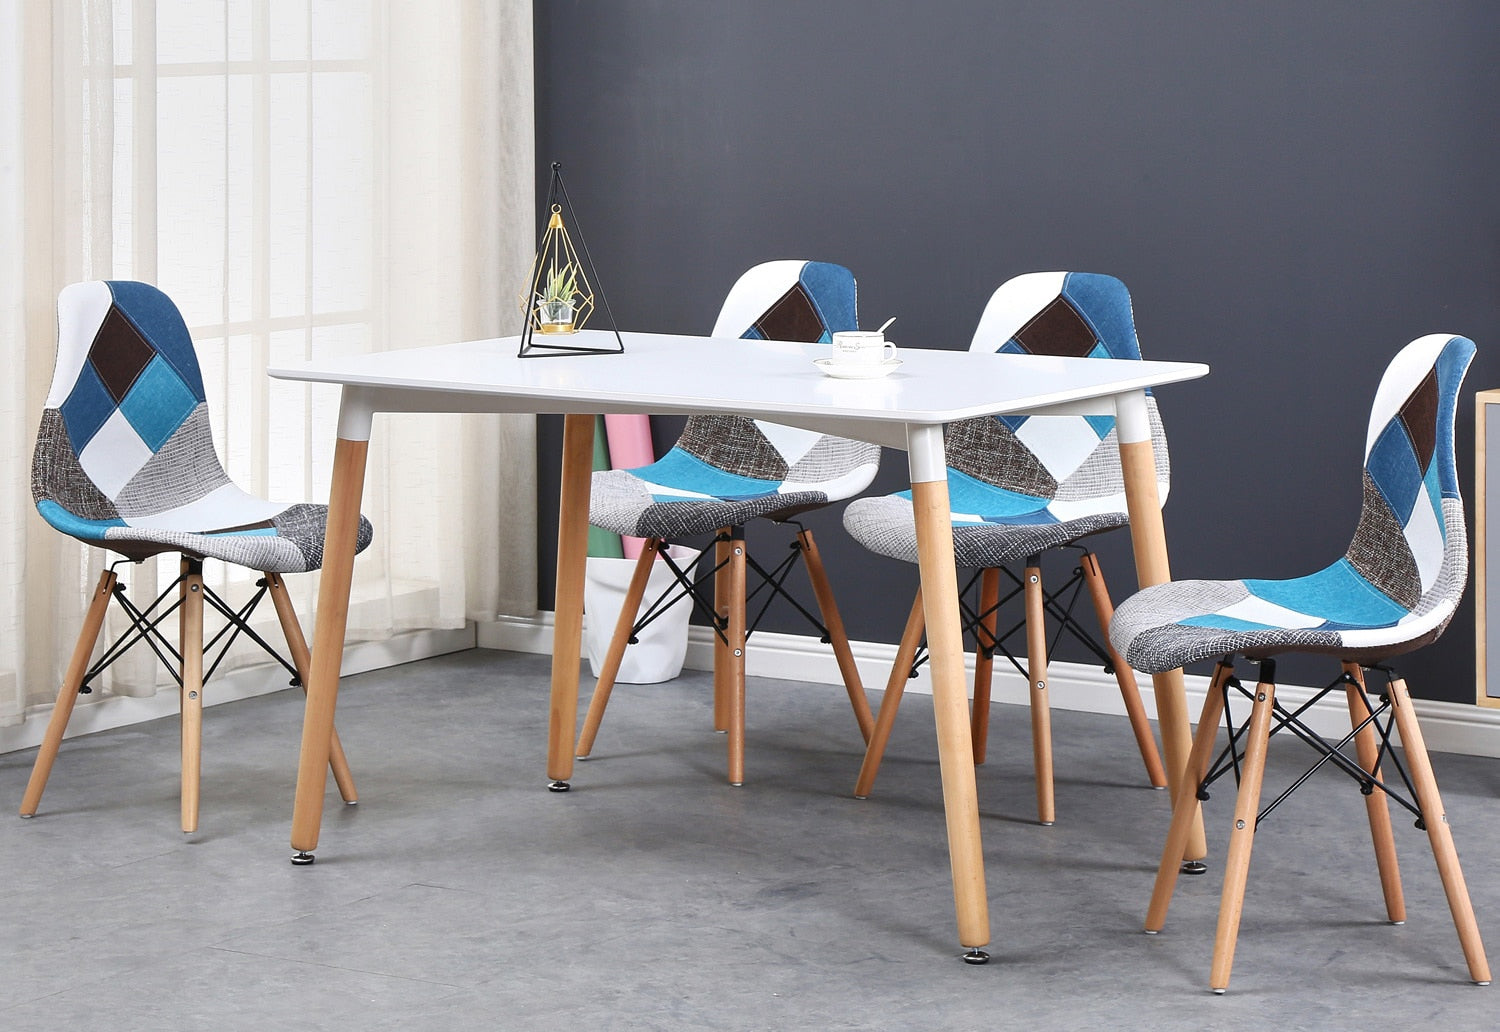 Dining Chairs Patchwork Fabric Nordic Round Esszimmerstühle Metal Bracket Chairs Sets